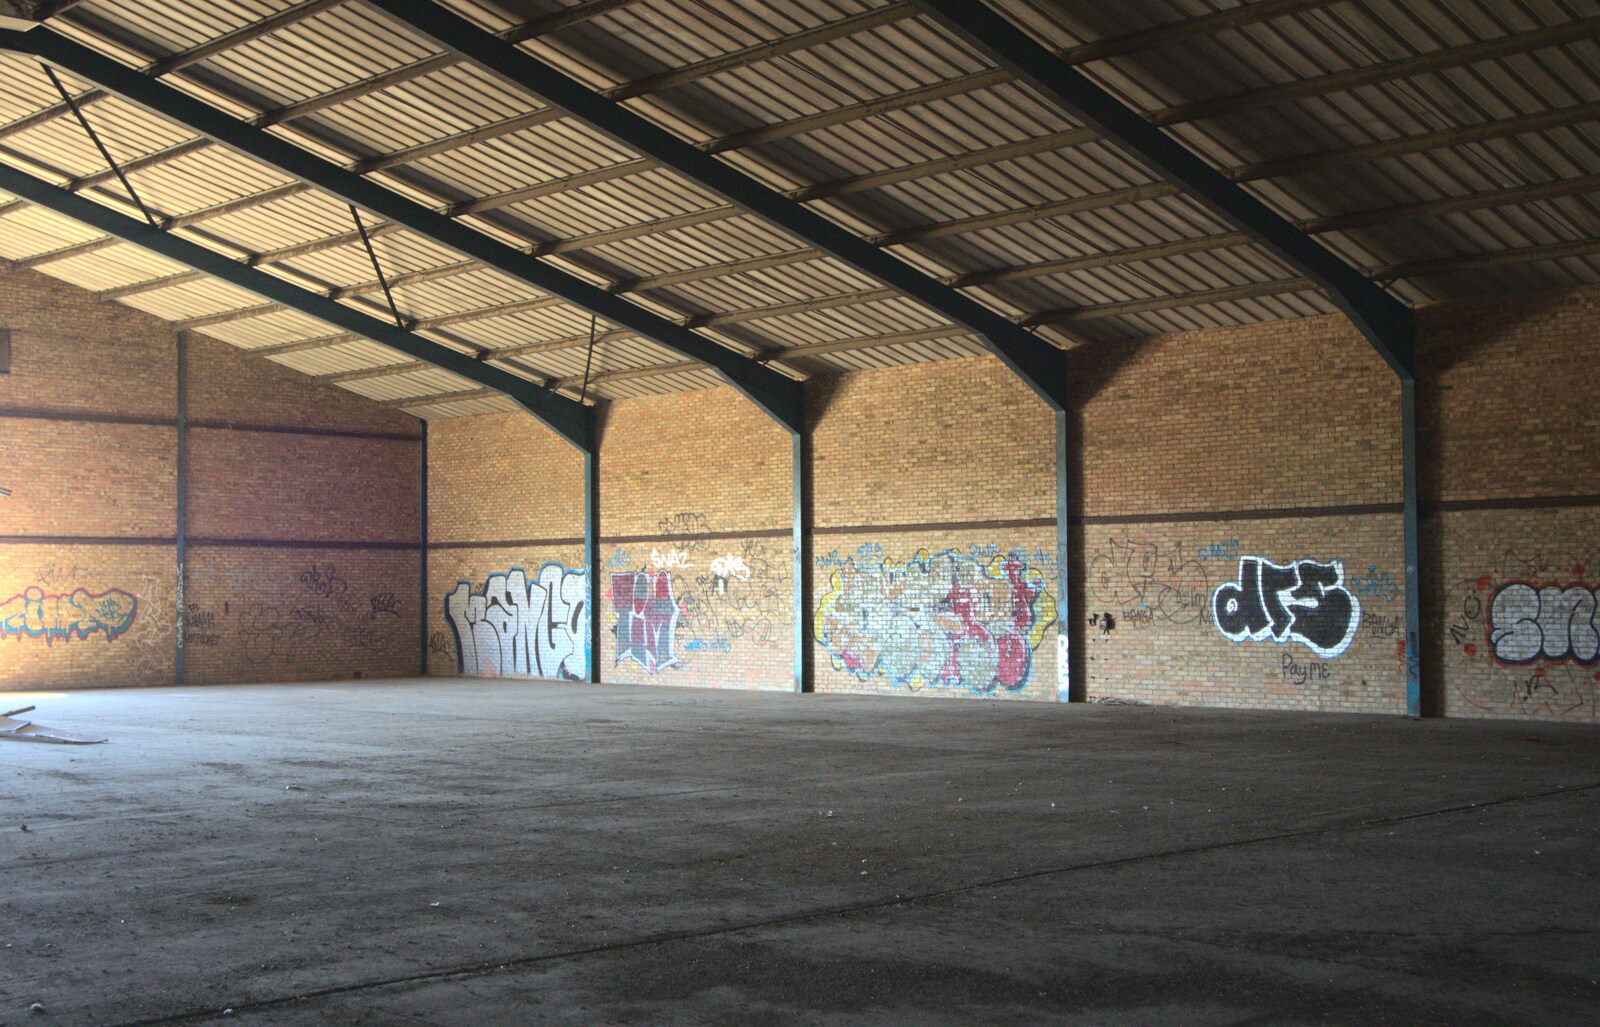 The huge empty warehouse from Rural Norfolk Dereliction and Graffiti, Ipswich Road, Norwich - 27th May 2012